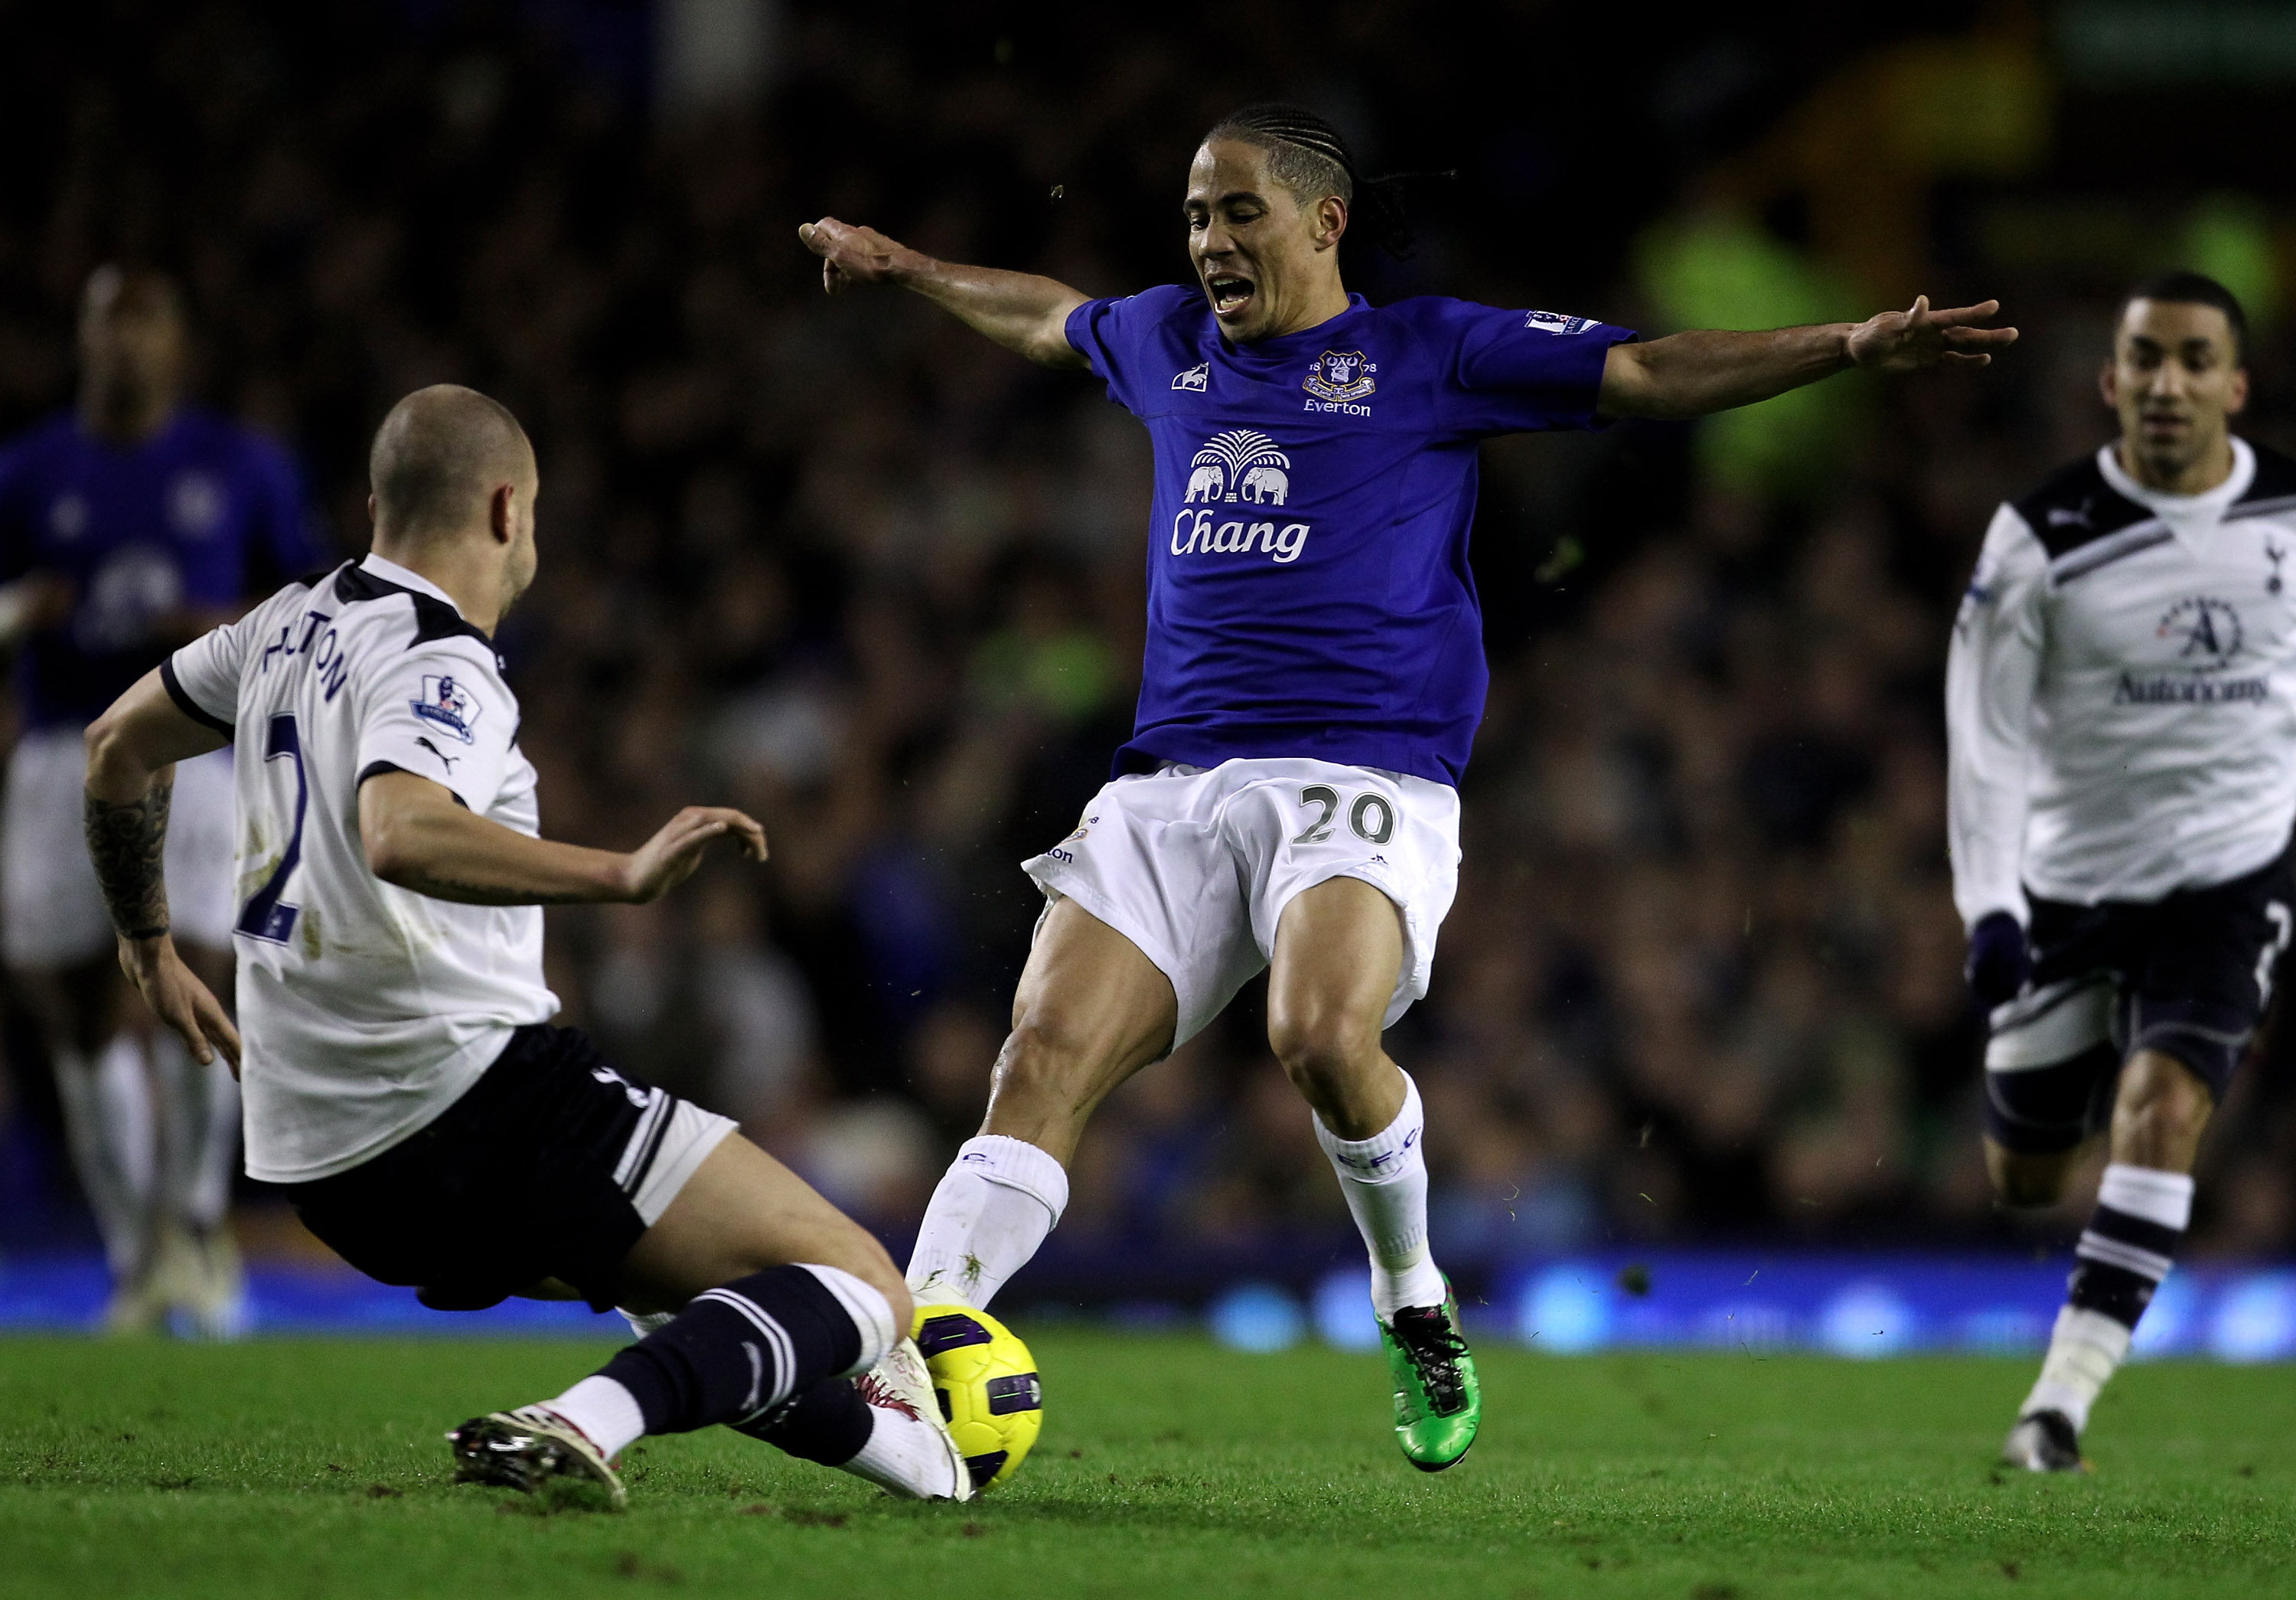 LIVERPOOL, ENGLAND - JANUARY 05:  Steven Pienaar of Everton is tackled by Alan Hutton of Tottenham Hotspur during the Barclays Premier League match between Everton and Tottenham Hotspur at Goodison Park on January 5, 2011 in Liverpool, England.  (Photo by